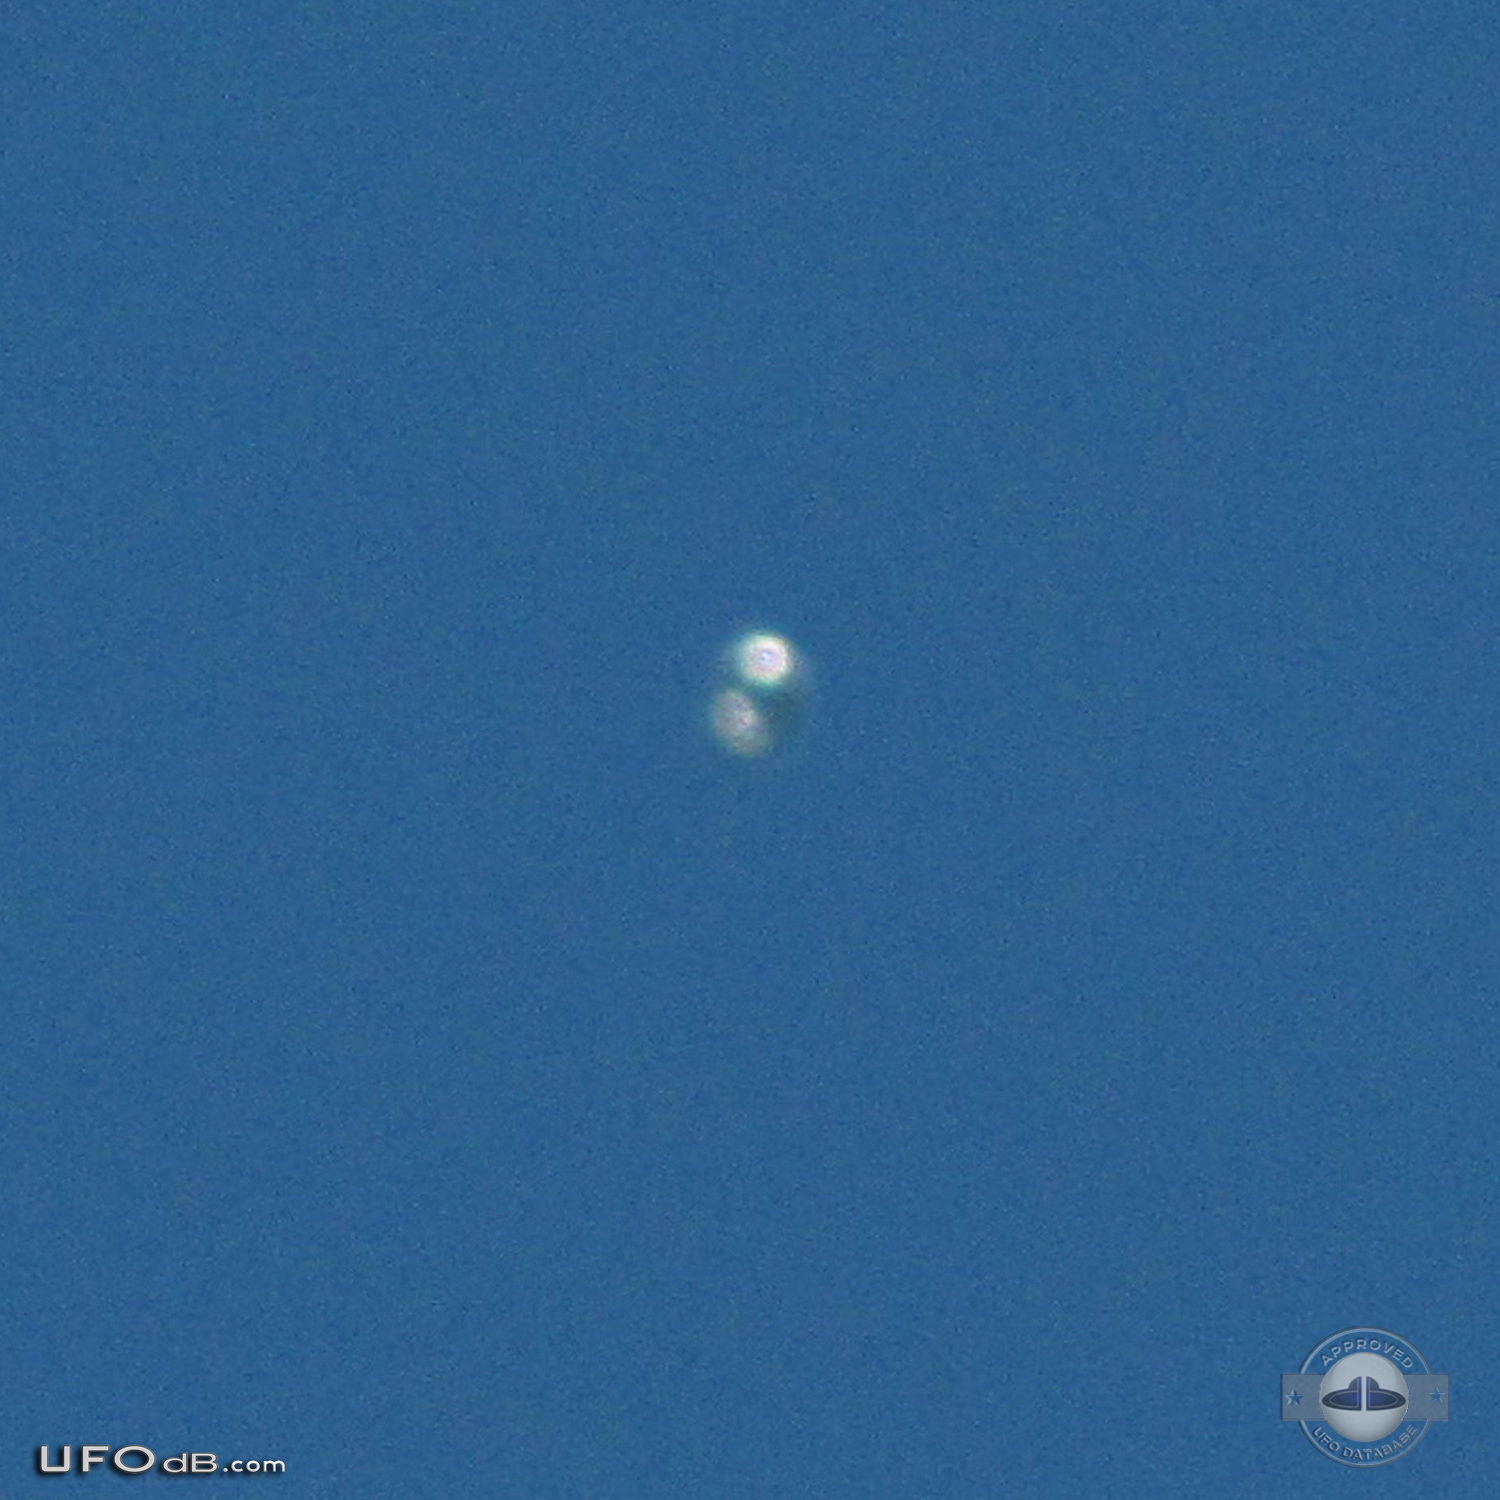 Donut shaped UFO with glowing silver material over Scituate Ma US 2012 UFO Picture #481-4